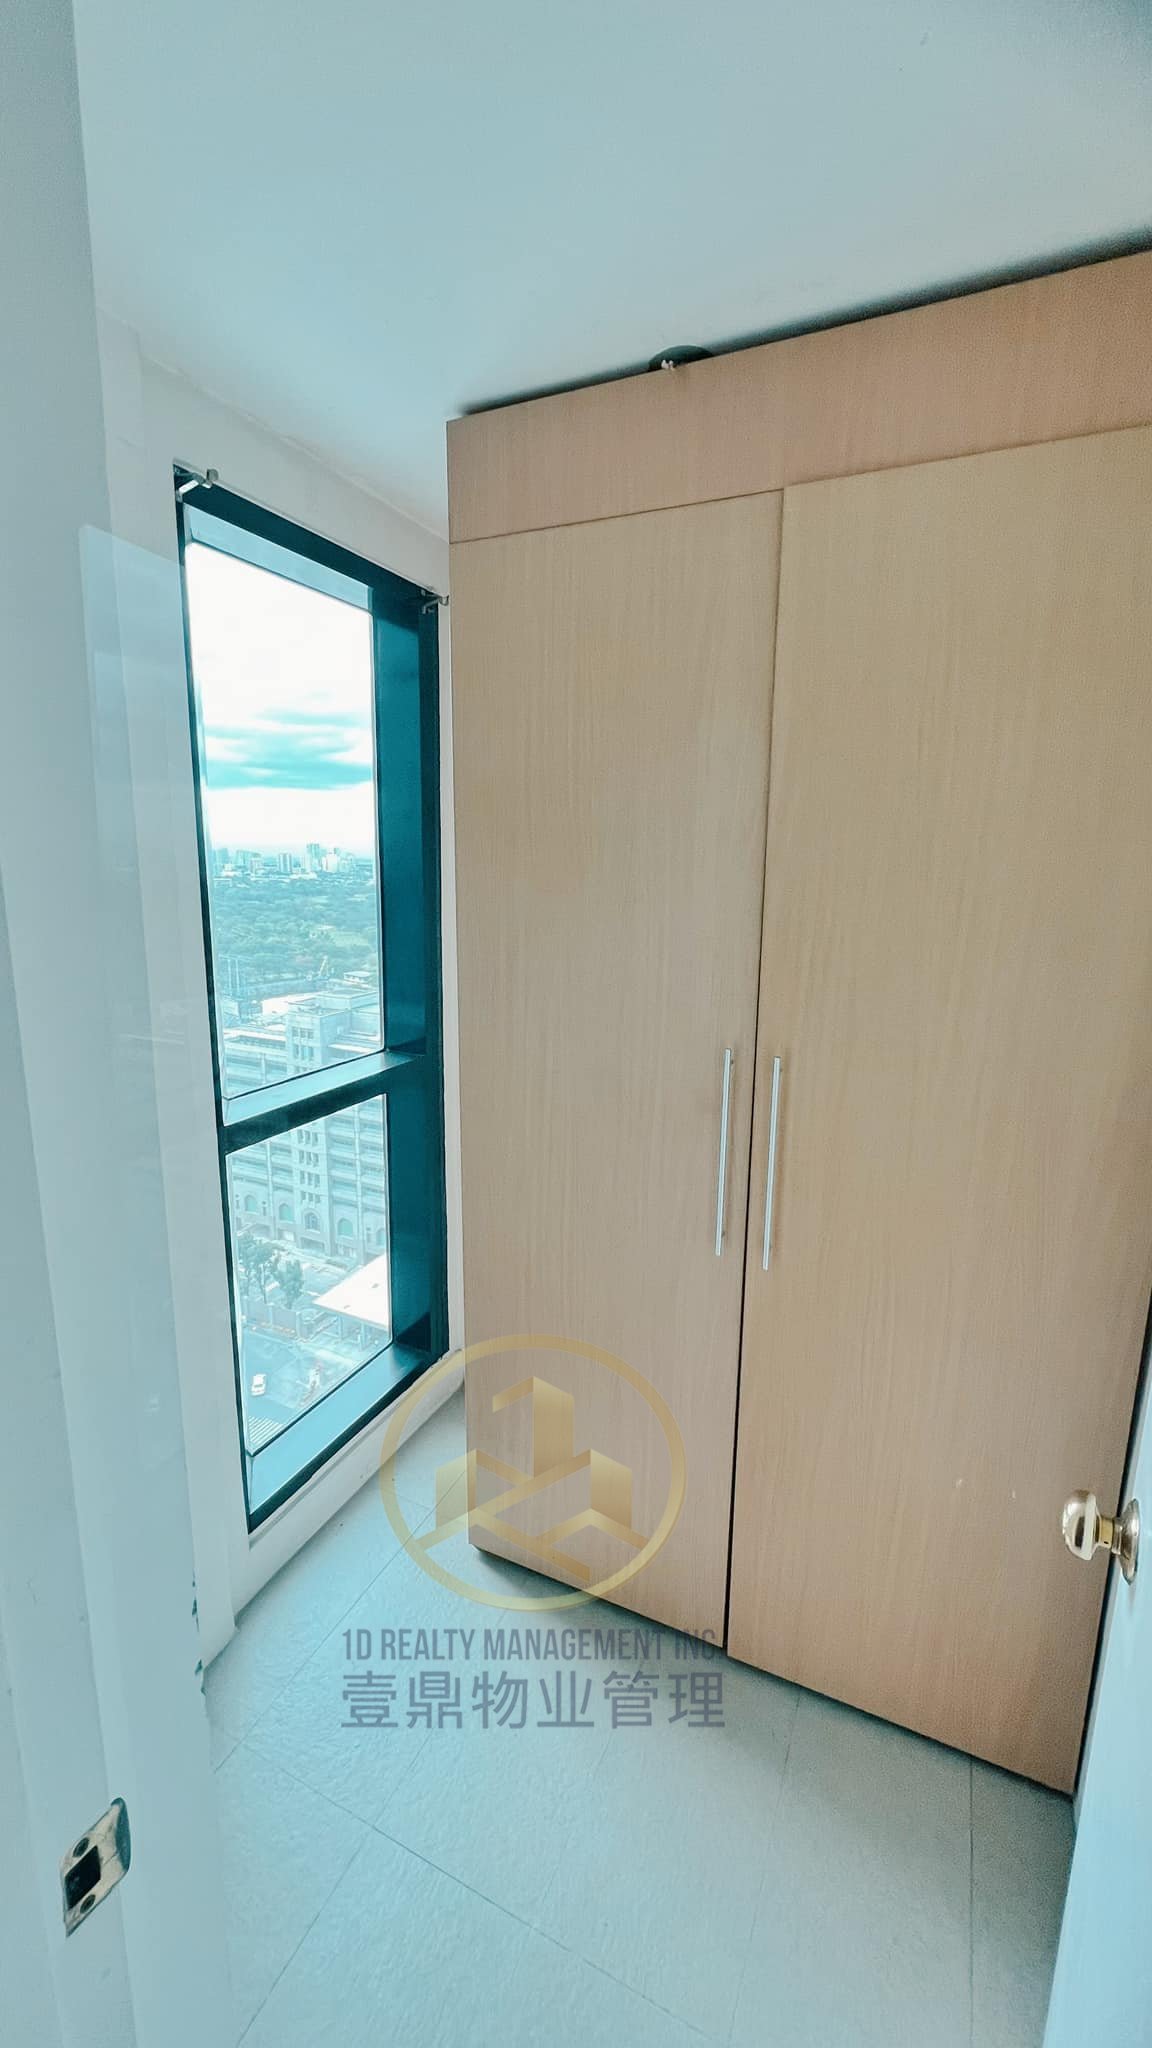 BSA Twin Towers Ortigas Center Mandaluyong - FOR LEASE